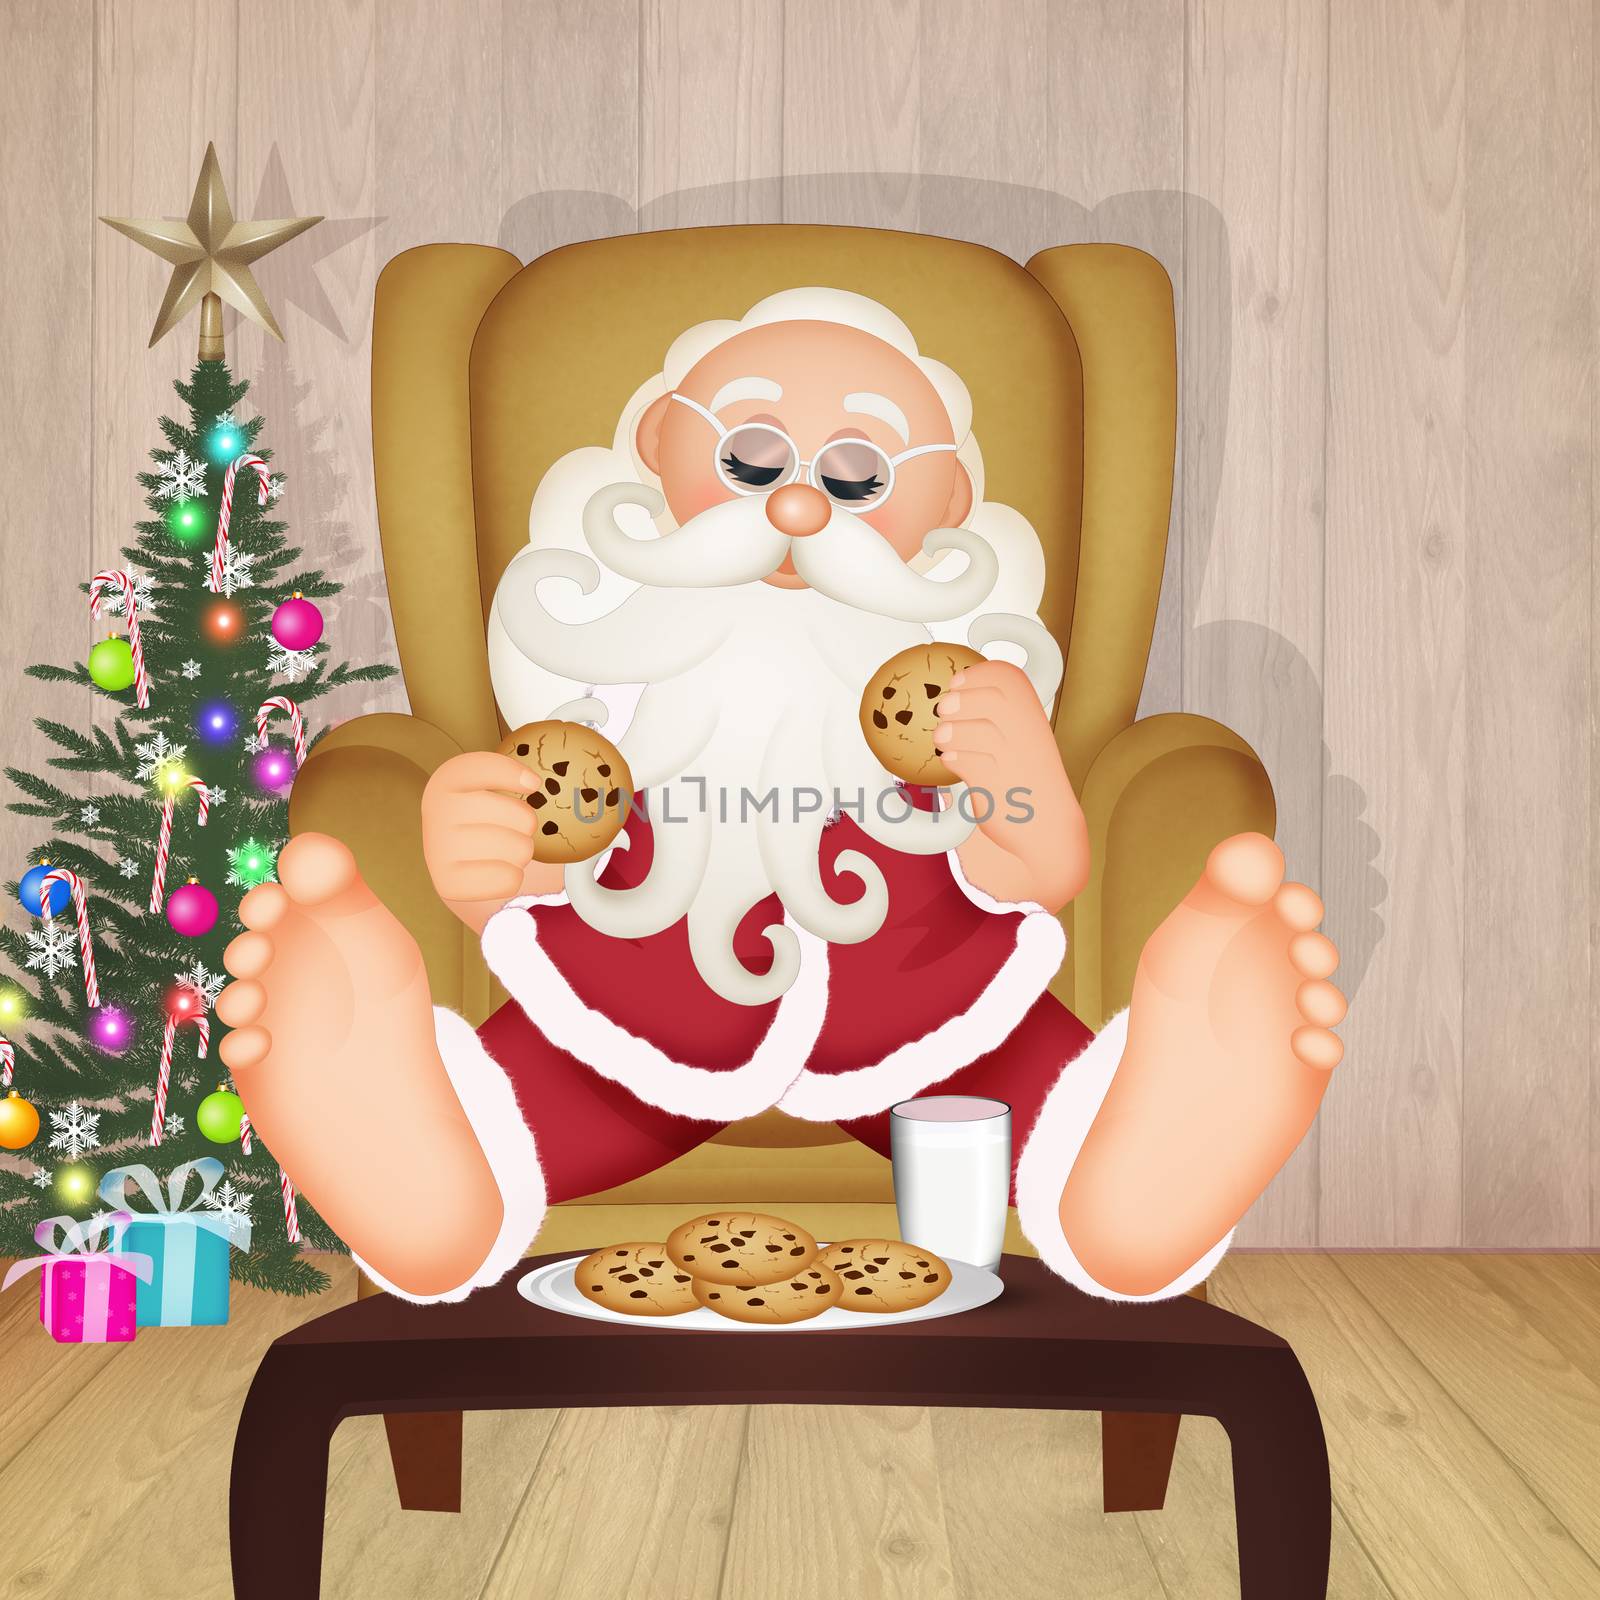 Santa Claus with milk and cookies by adrenalina